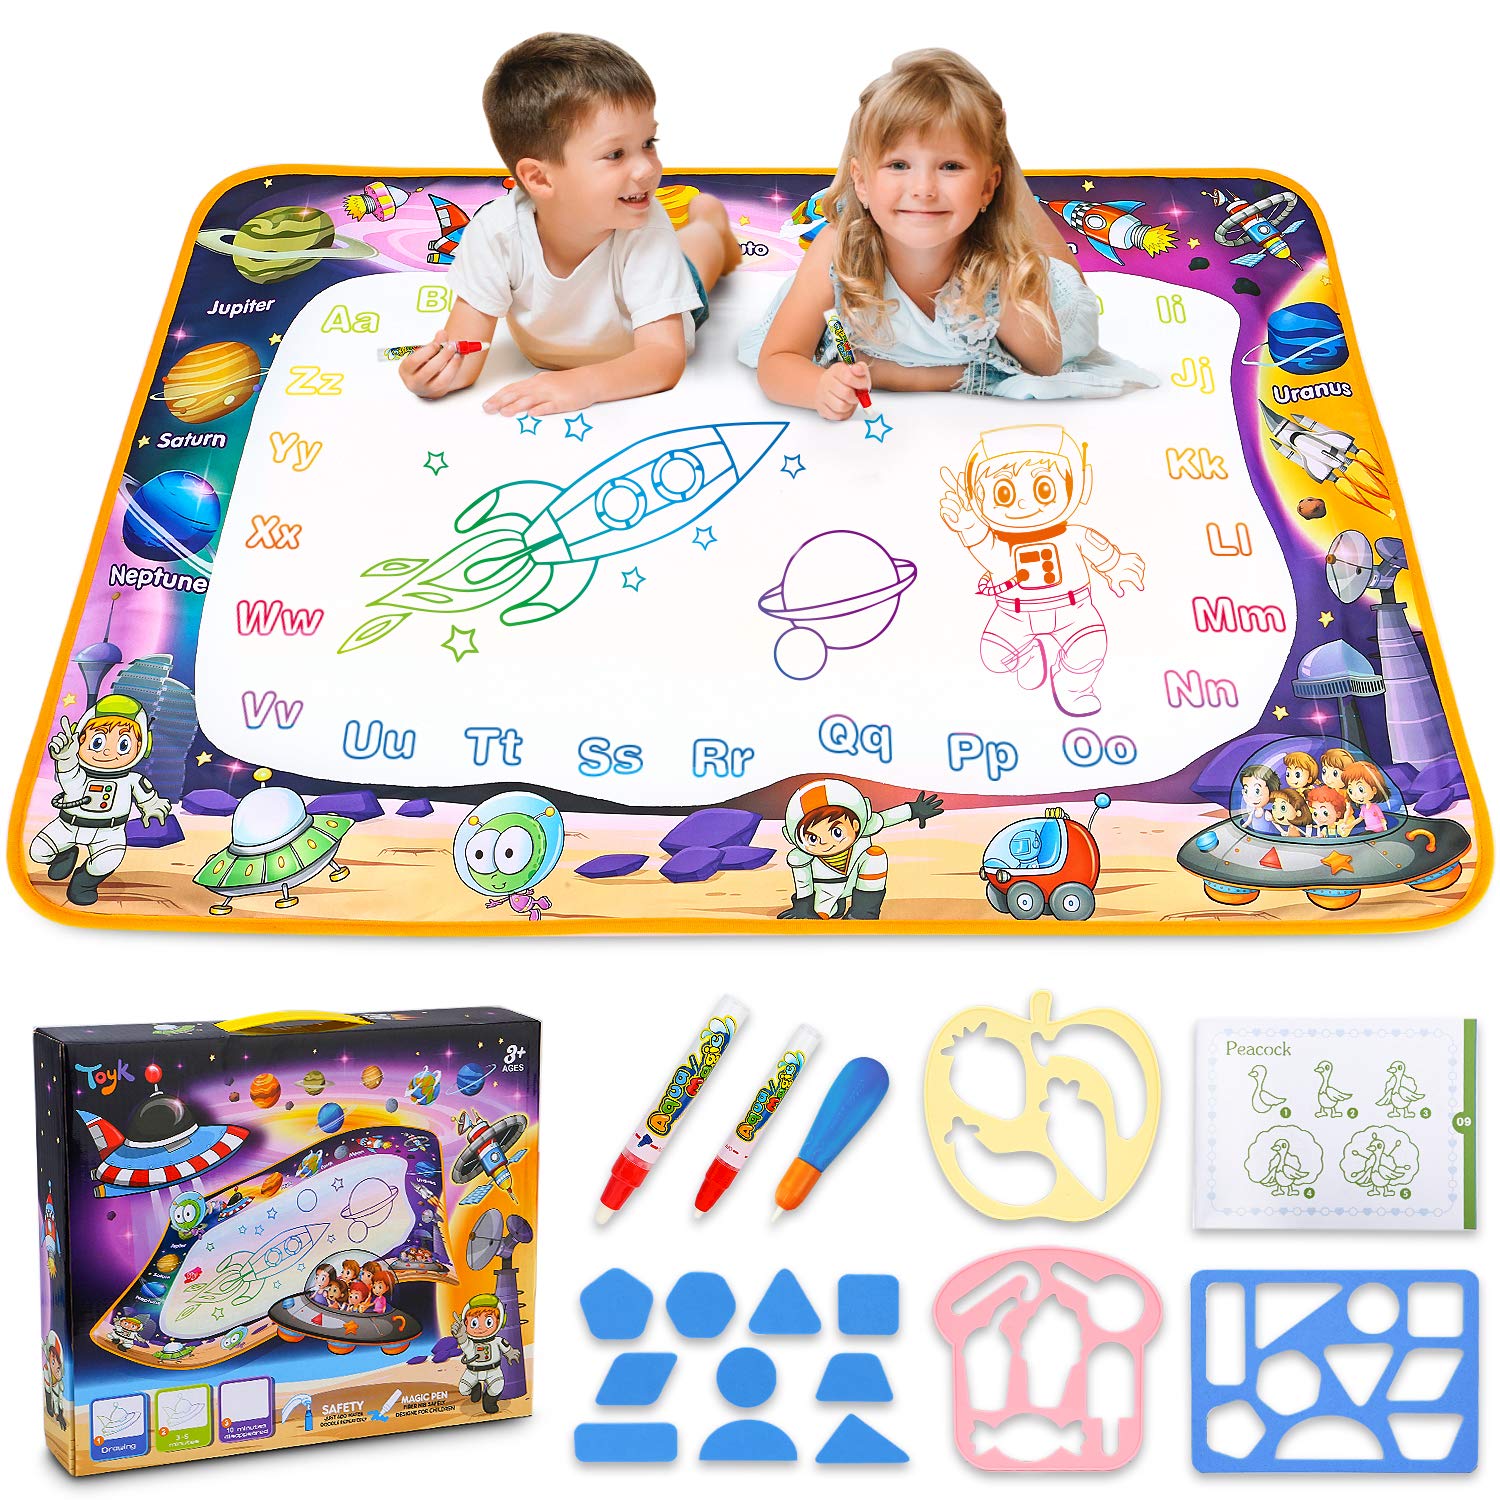 Aqua Magic Mat - Kids Painting Writing Doodle Board Toy - Color Doodle Drawing Mat Bring Magic Pens Educational Toys for Age 2 3 4 5 6 7 8 Year Old Girls Boys Toddler Gift